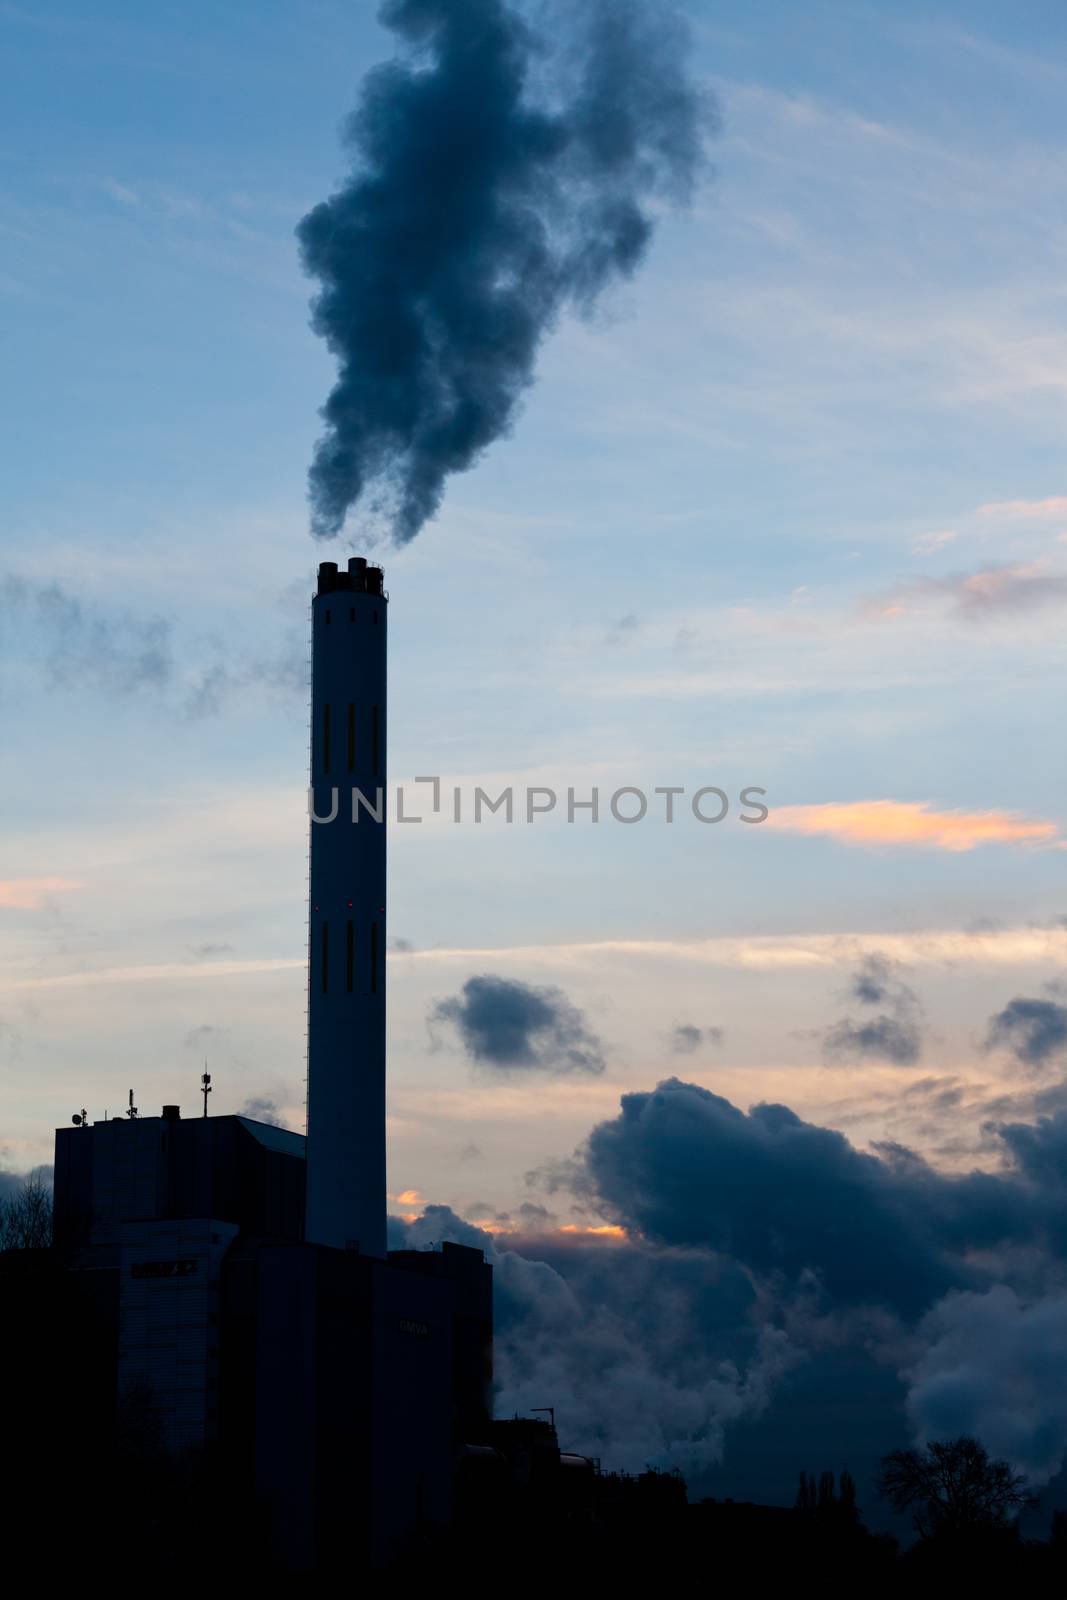 Smokestack chimneys belching black smoke pollutants and carbon dioxide greenhouse gas into the atmosphere polluting and contributing to global warming